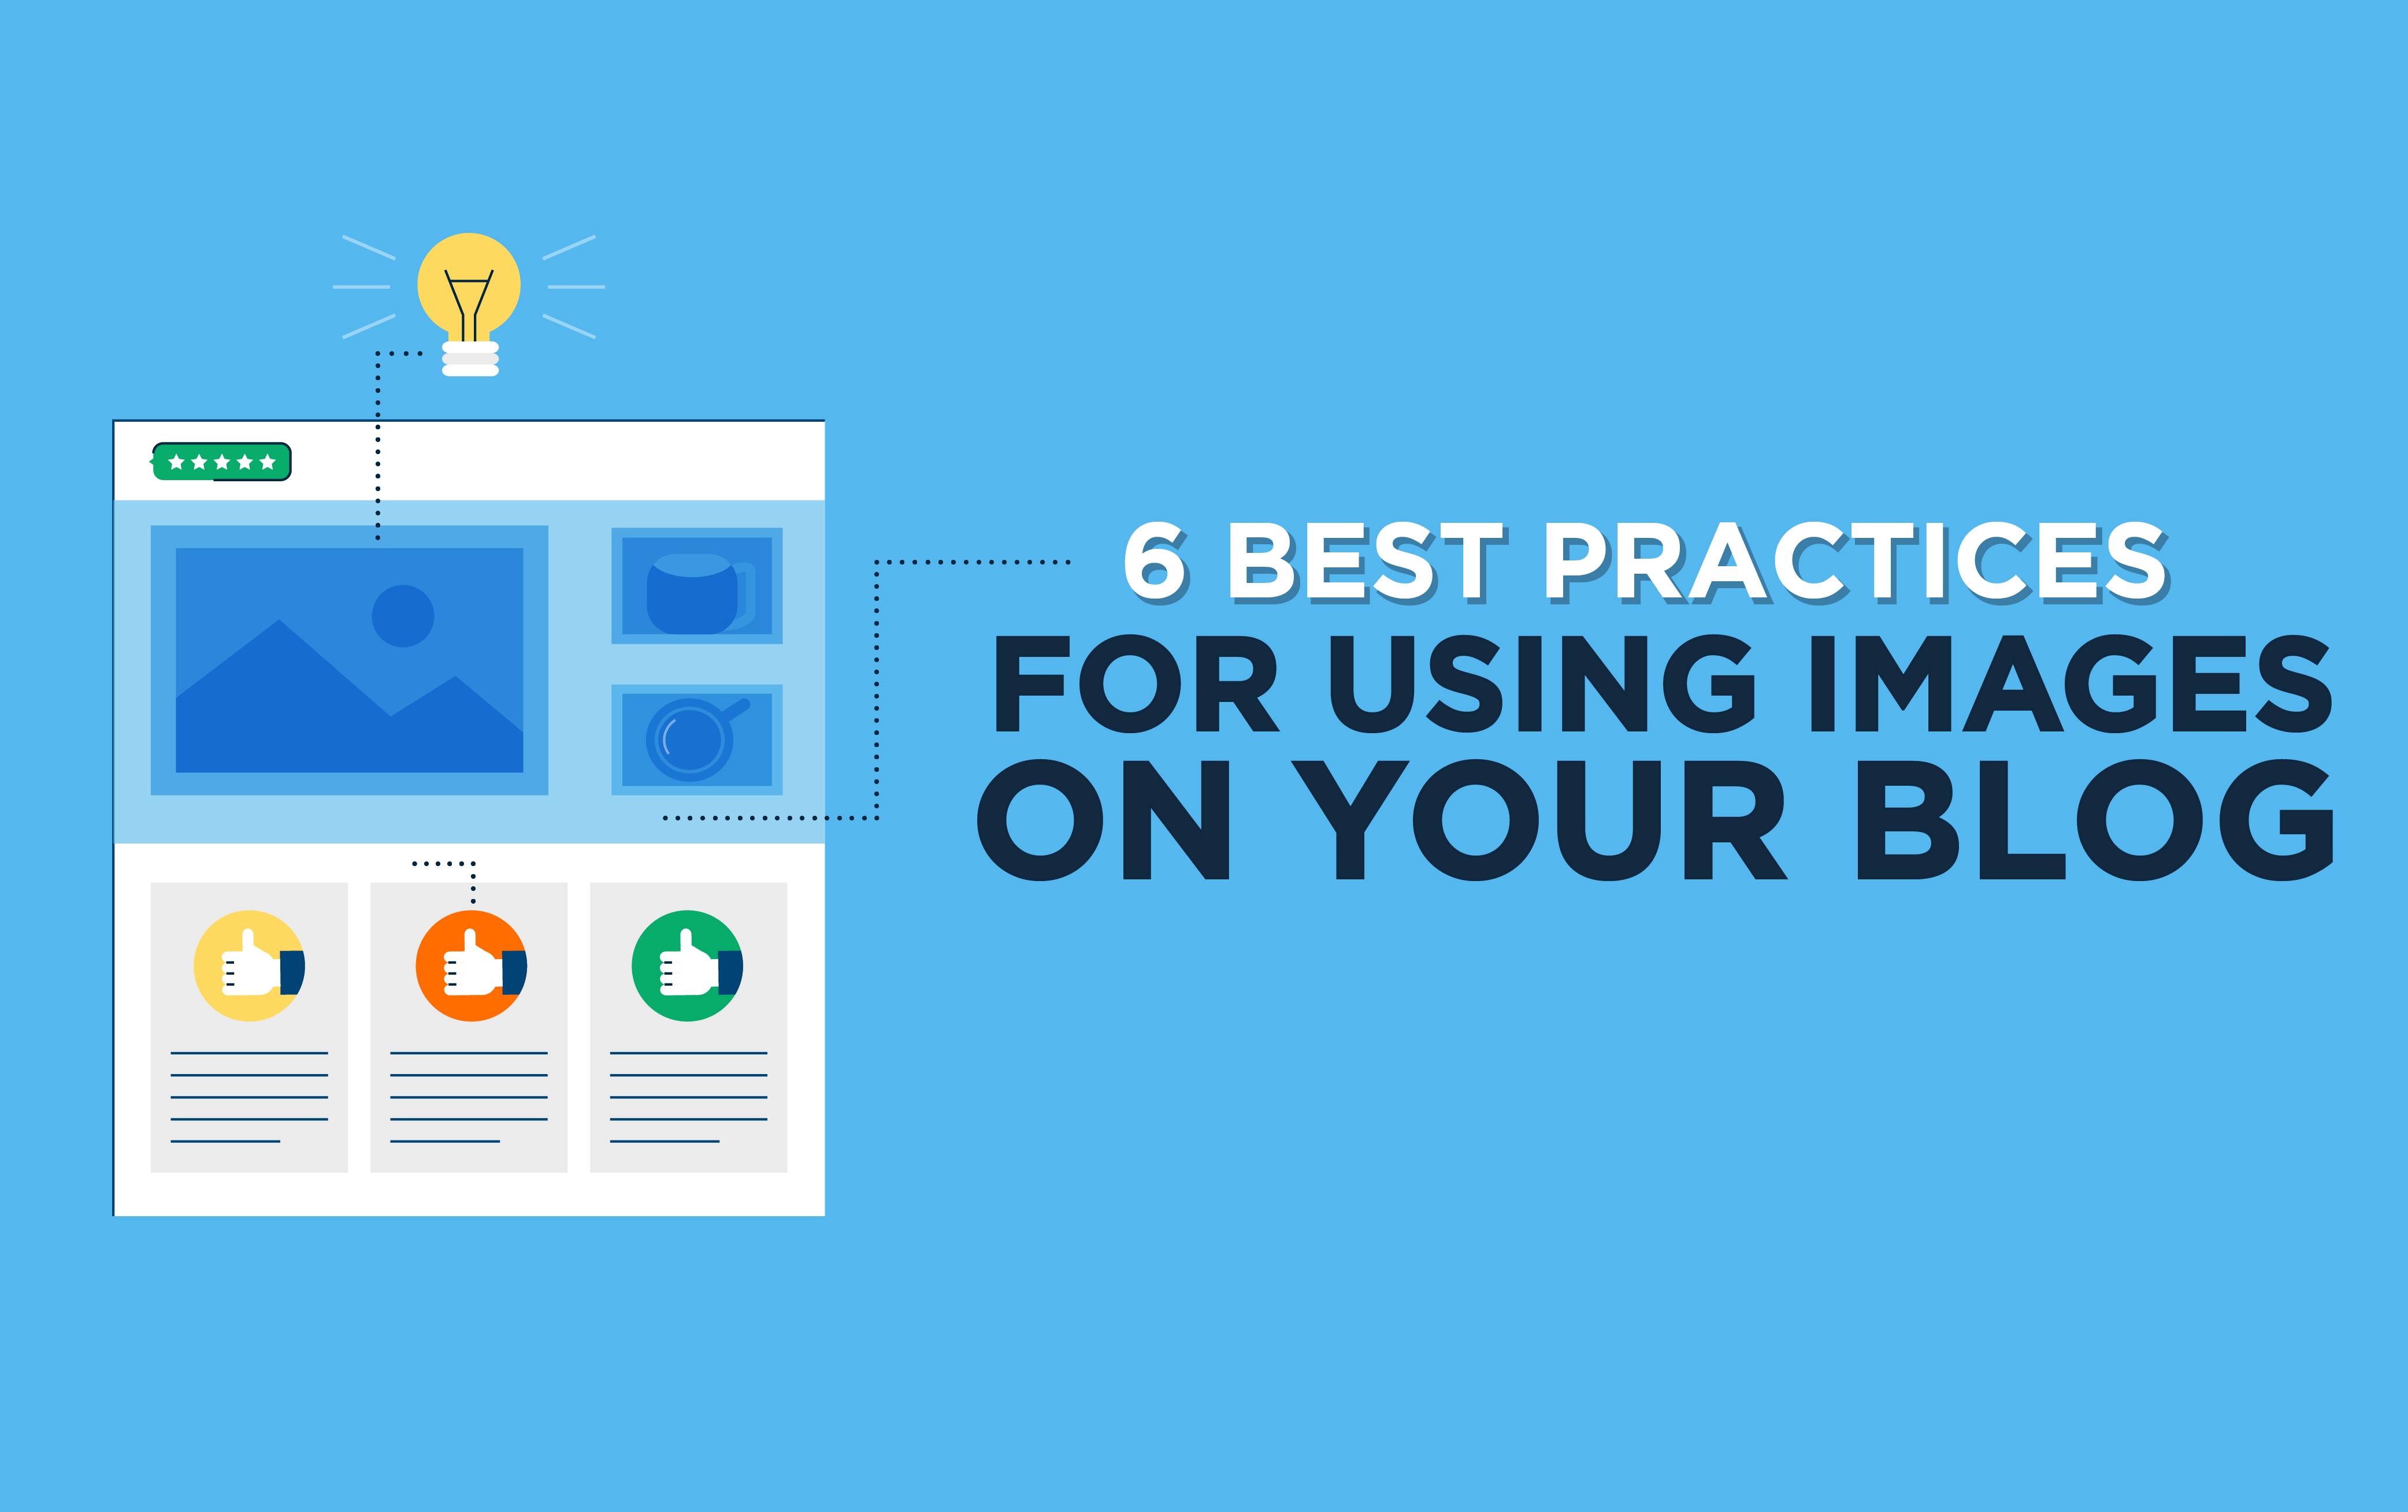 6 Best Practices for Using Images on Your Blog (Tutorial on Blog Images)